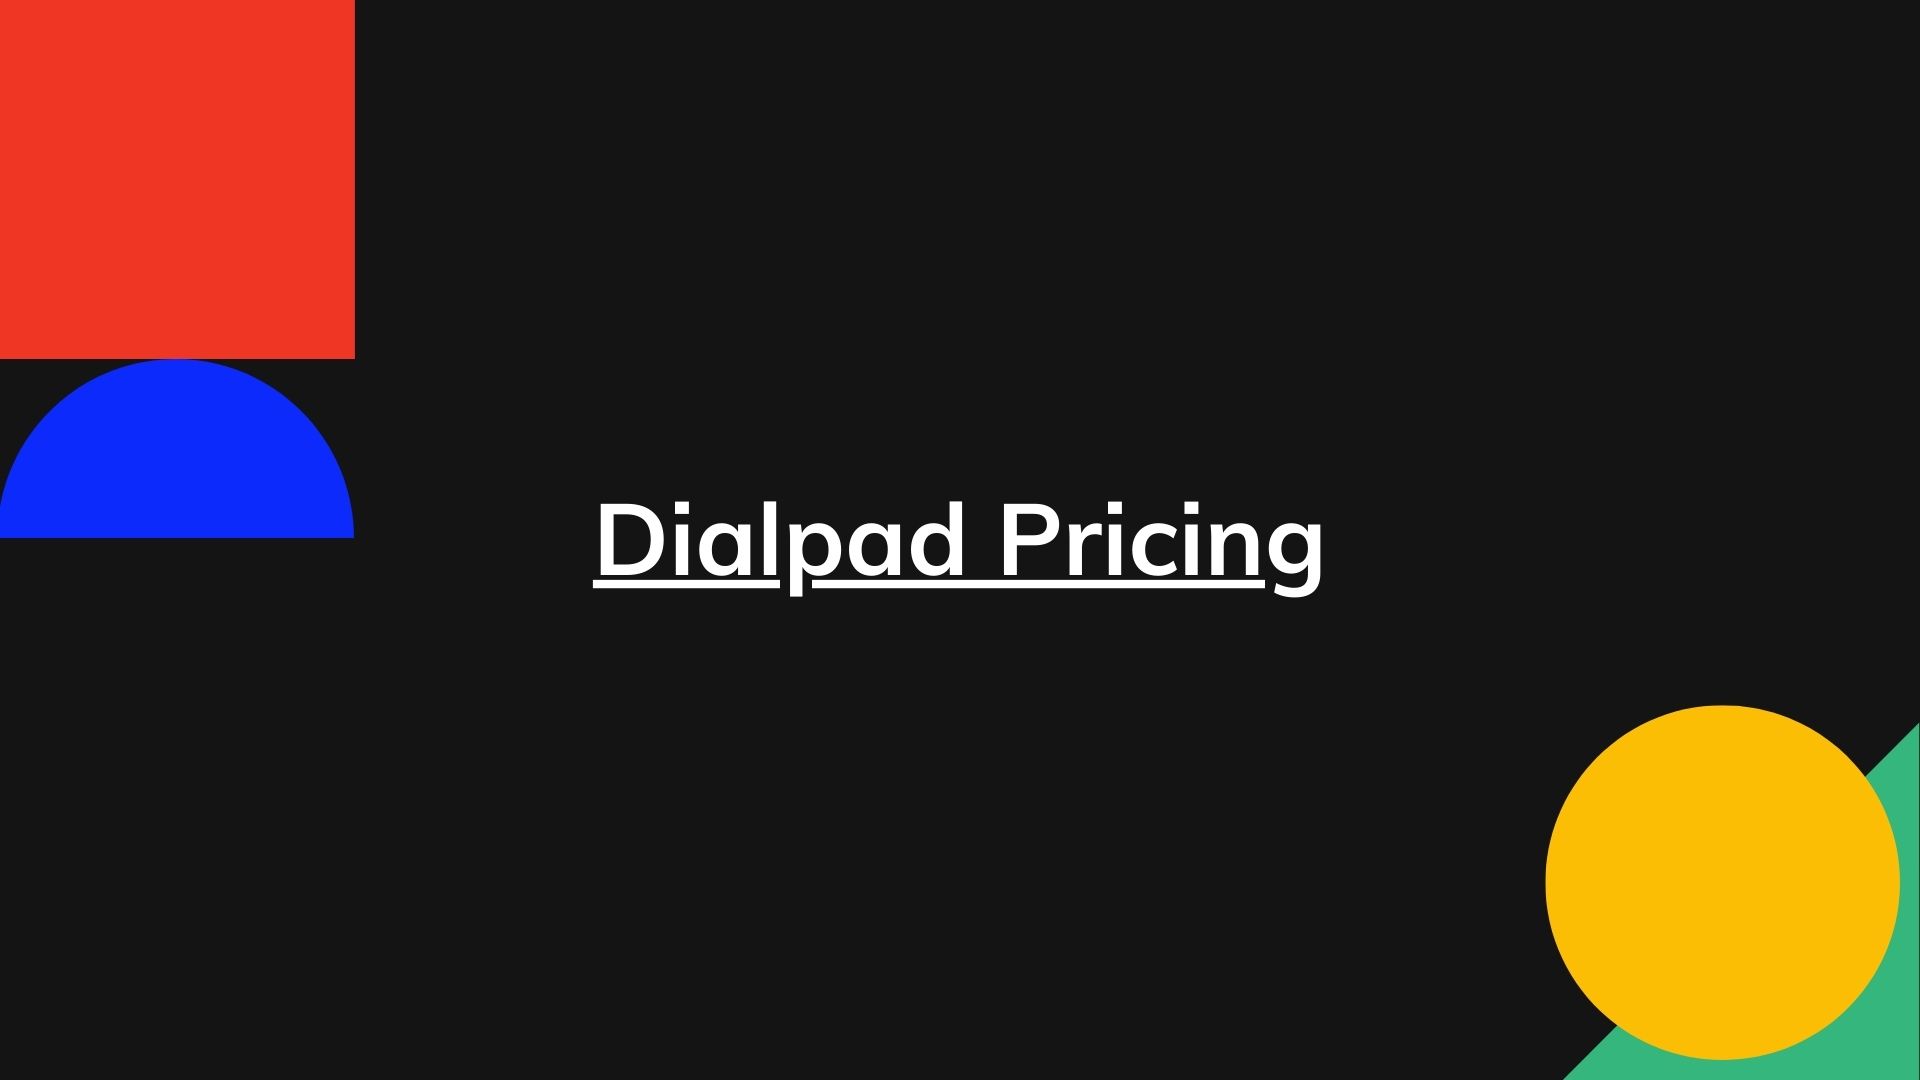 Dialpad Pricing – Actual Prices for All Plans, Including Enterprise